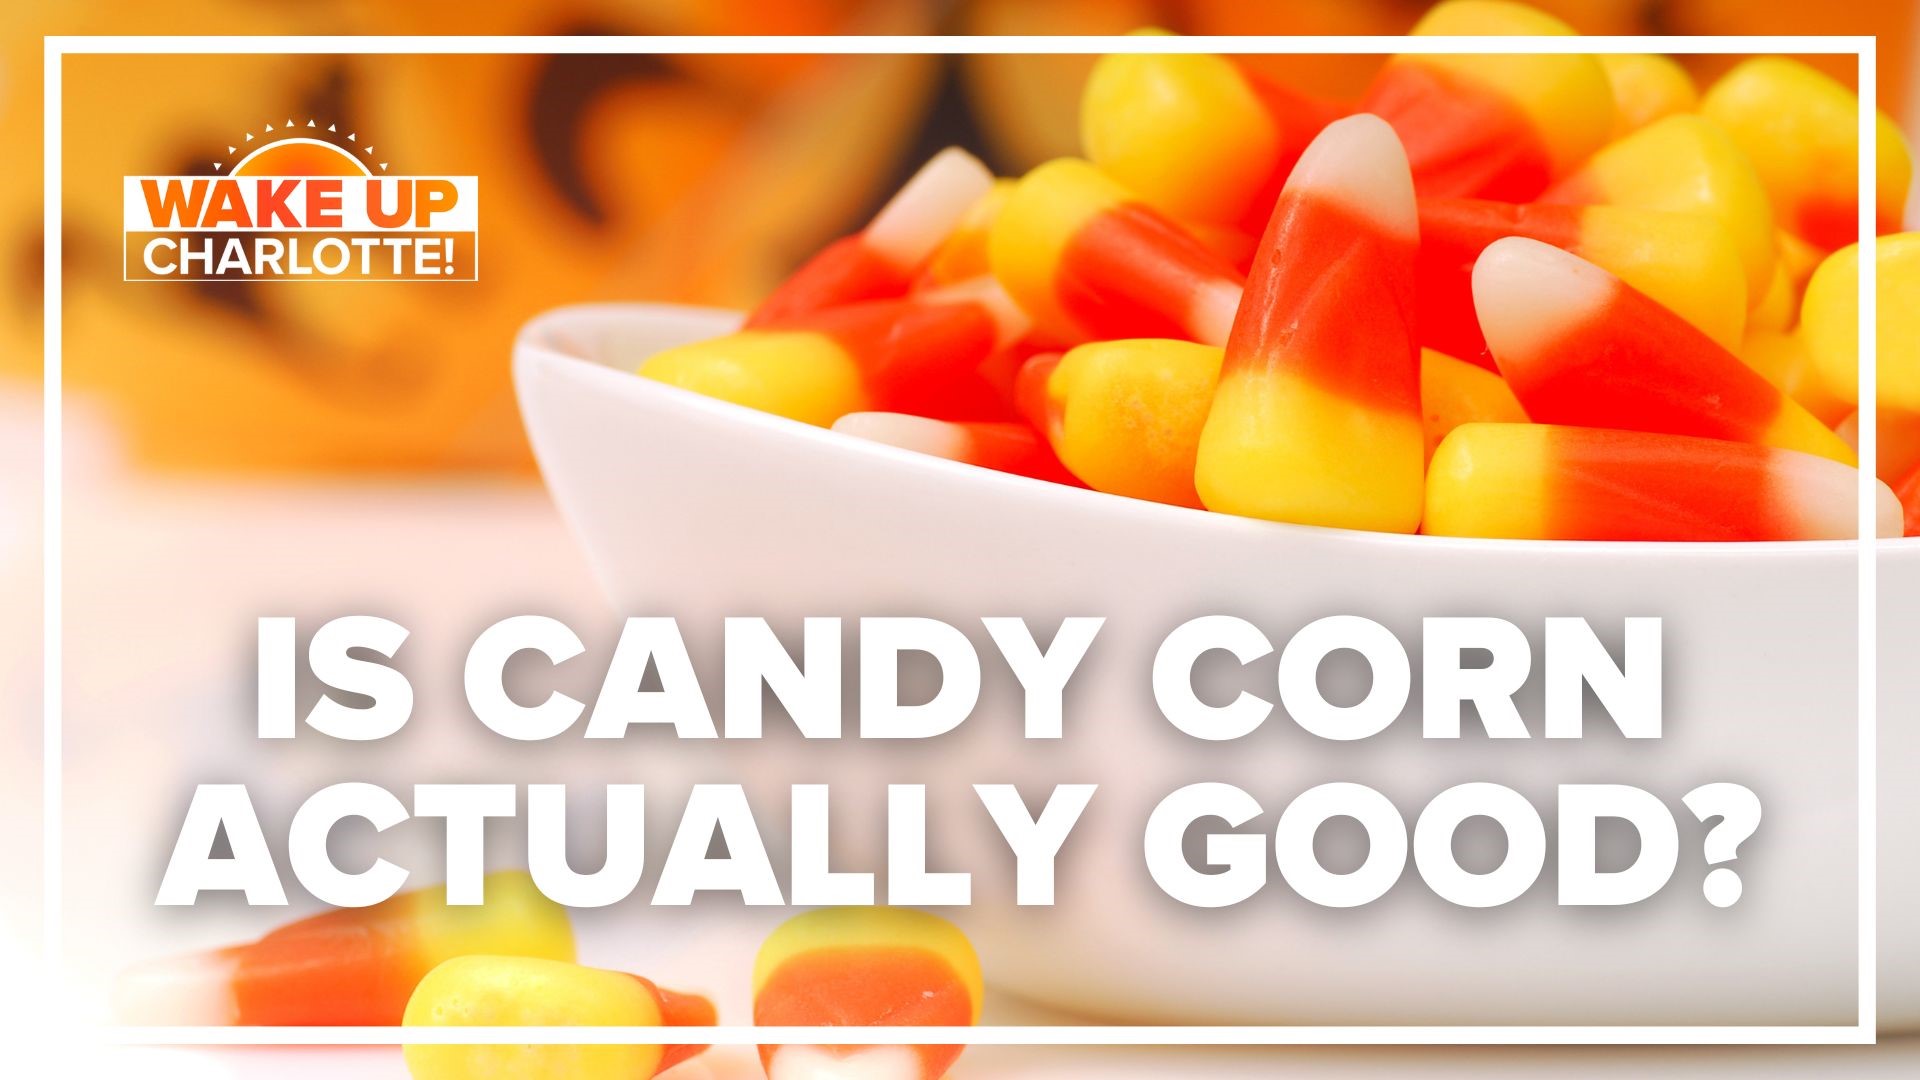 Some people have reservations about a beloved Halloween candy due to how it's made.